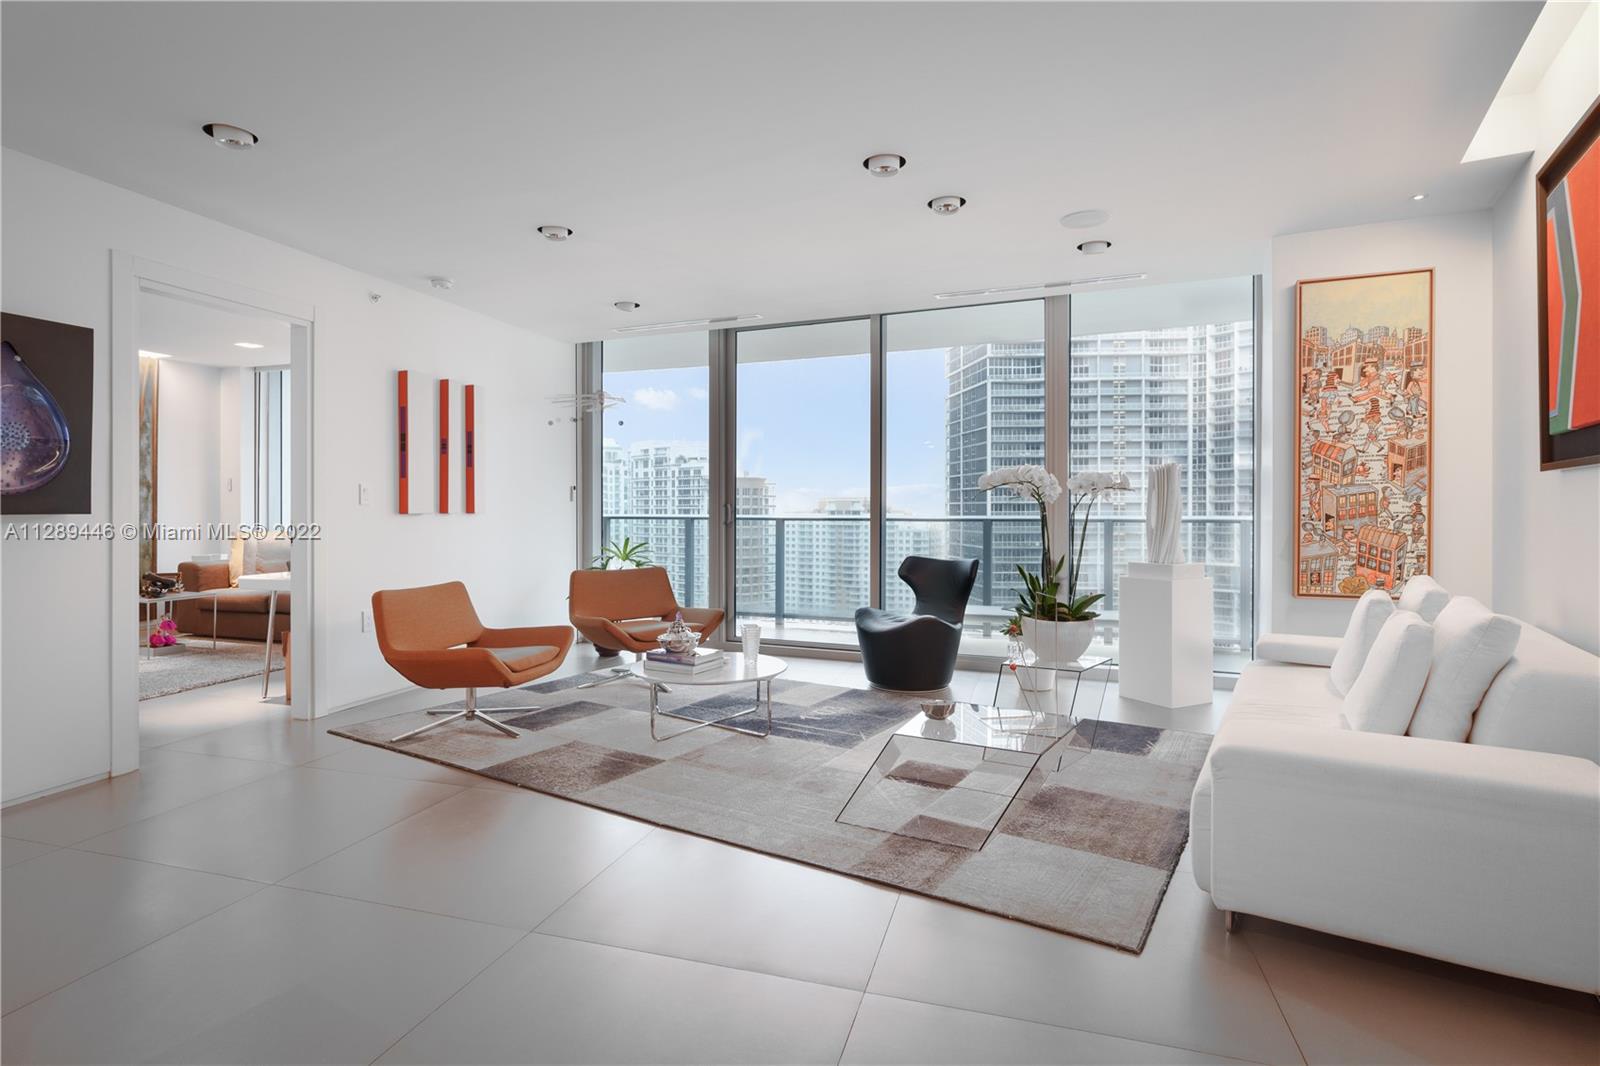 Move-in ready unit at the desirable Epic Residences in the heart of Downtown Miami, arguably the most urban and pedestrian-friendly neighborhood in Miami. This 2 bedroom + 2.5 bathroom unit is in the sought-after 08 line, which offers both skyline and water views. The unit has been upgraded with custom Italian porcelain-tile flooring, designer lighting throughout the unit and built-out closets. The Open concept Snaidero kitchen has Miele appliances and is ideal for entertaining as is the balcony with views of Ocean , the Miami river,  the port of Miami and the Brickell Skyline.

The Epic residences is located in the same building as the famed Epic Kimpton Hotel and residents get to enjoy all resort amenities like the Pool, Zuma restaurant, Exhale Spa as well as residents-only manities.